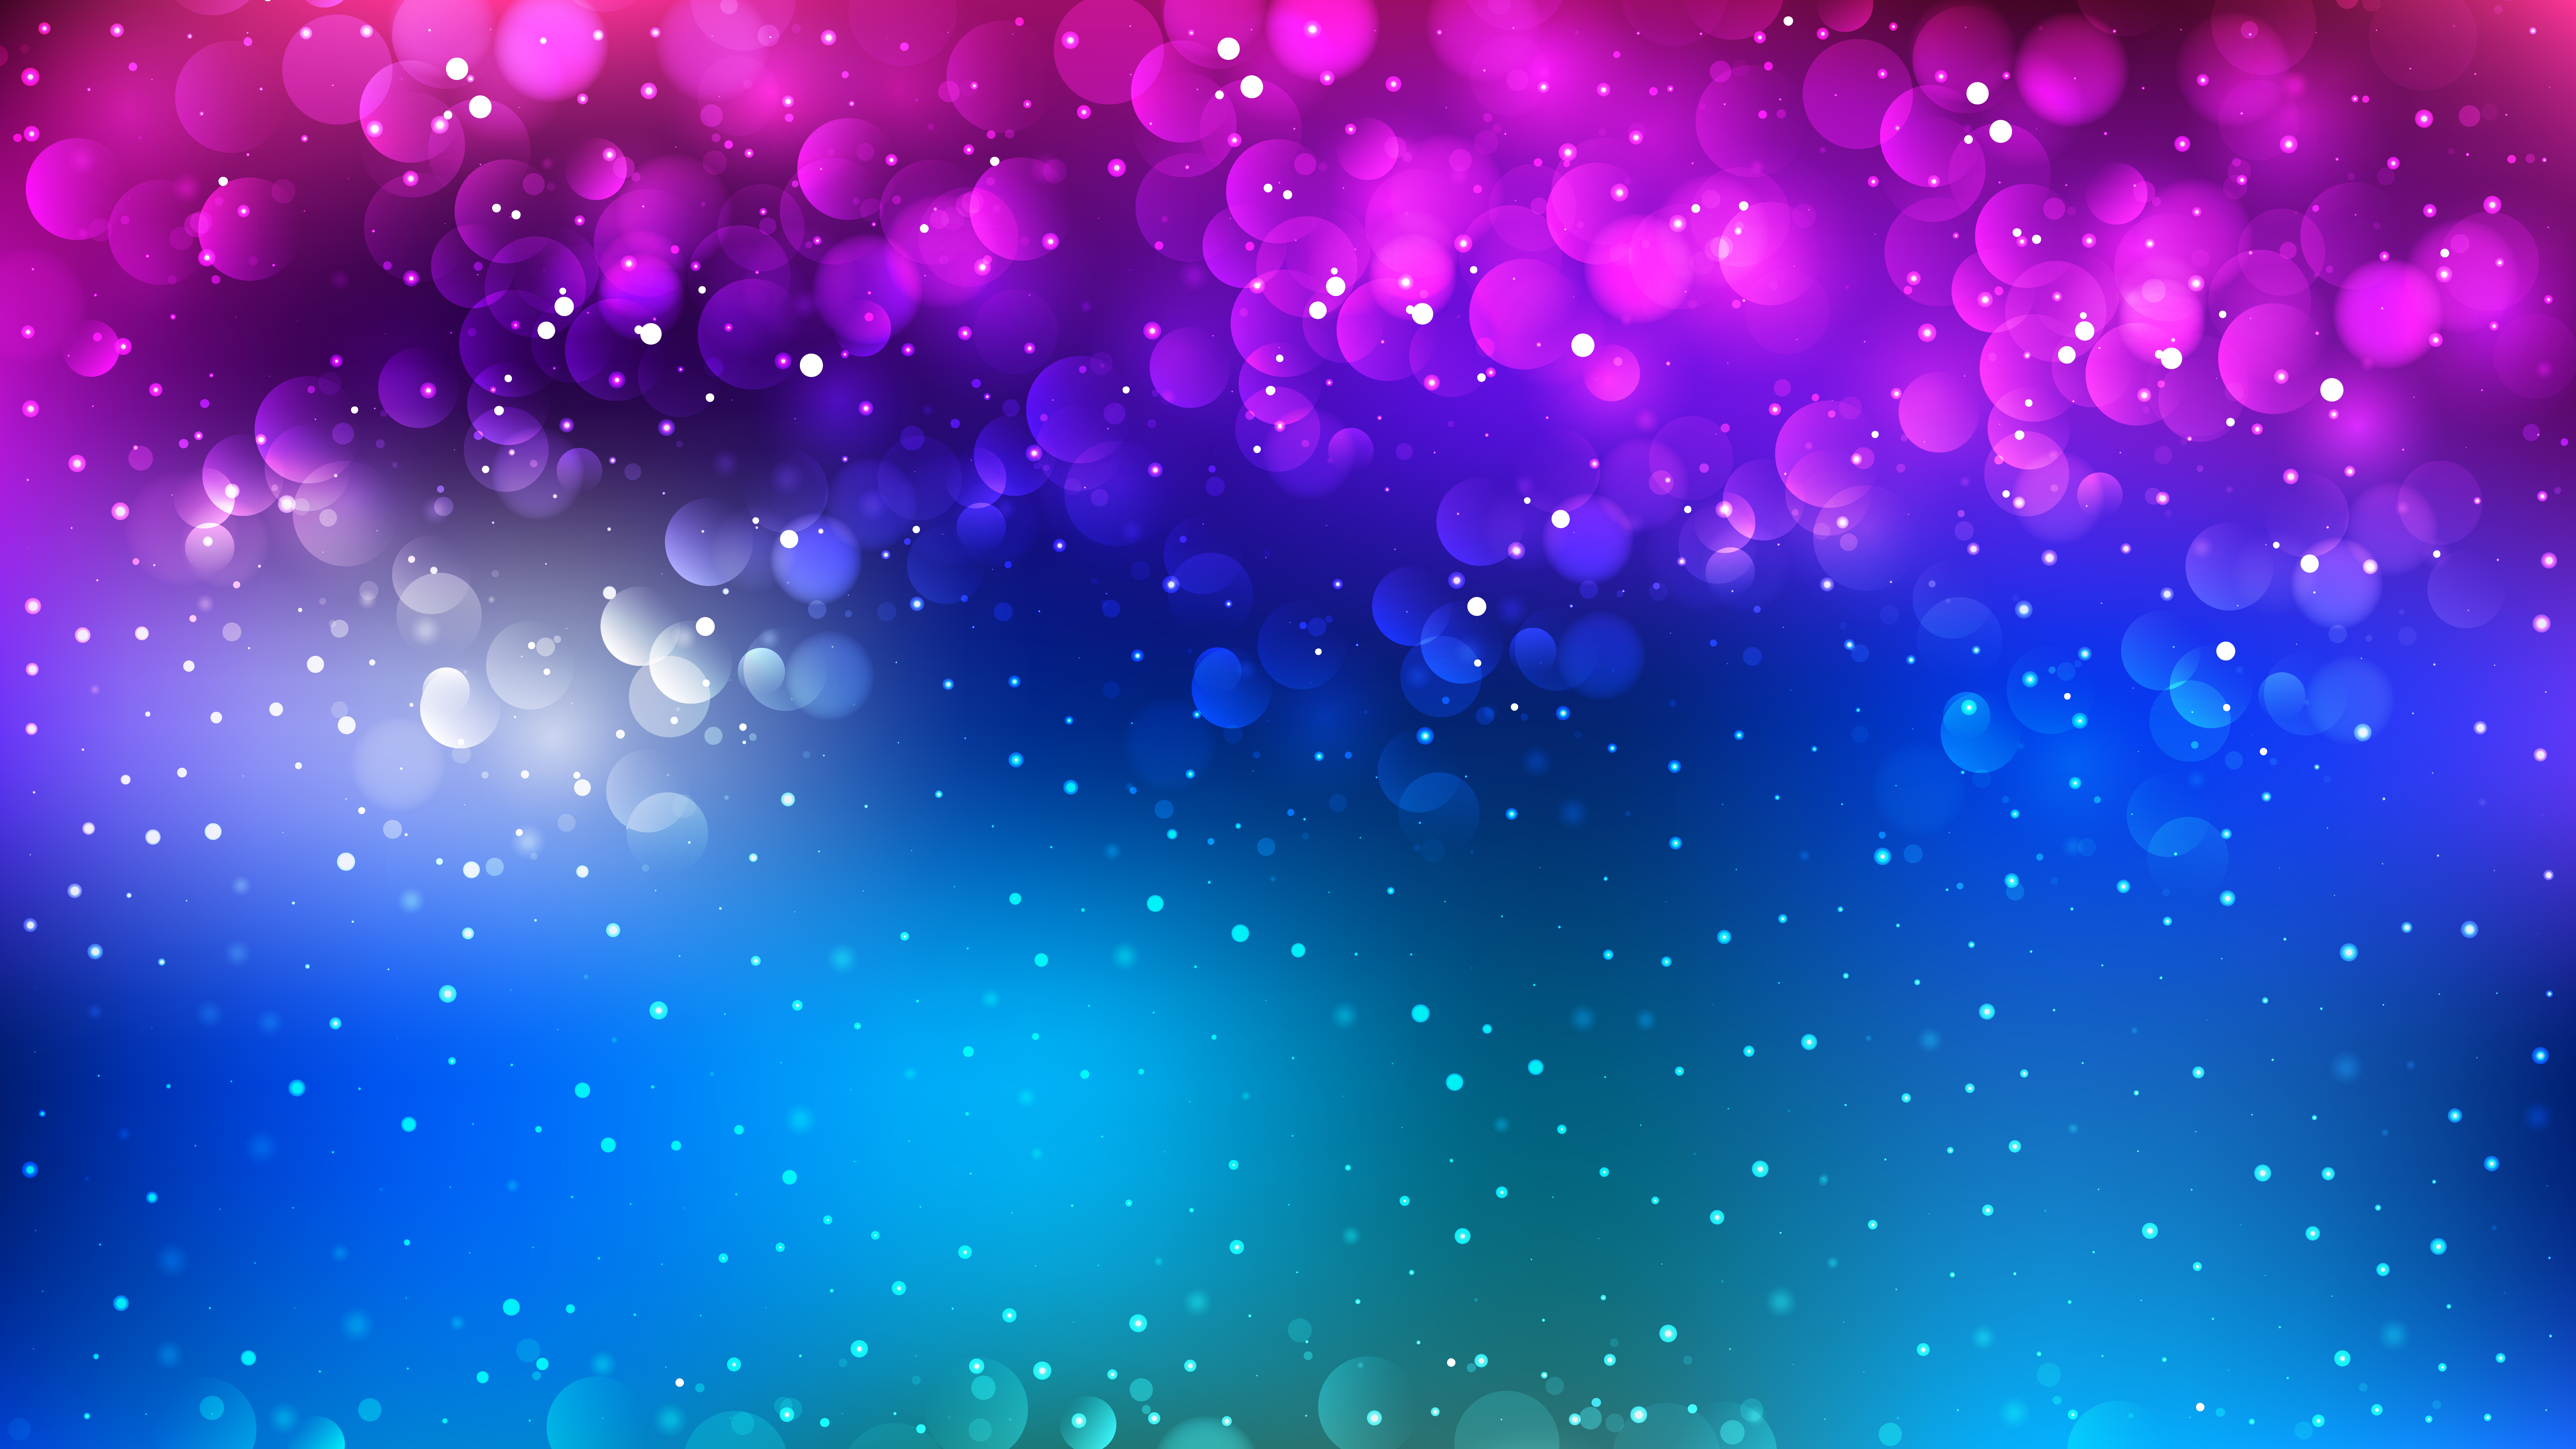 Free Abstract Pink and Blue Blurred Lights Background Graphic